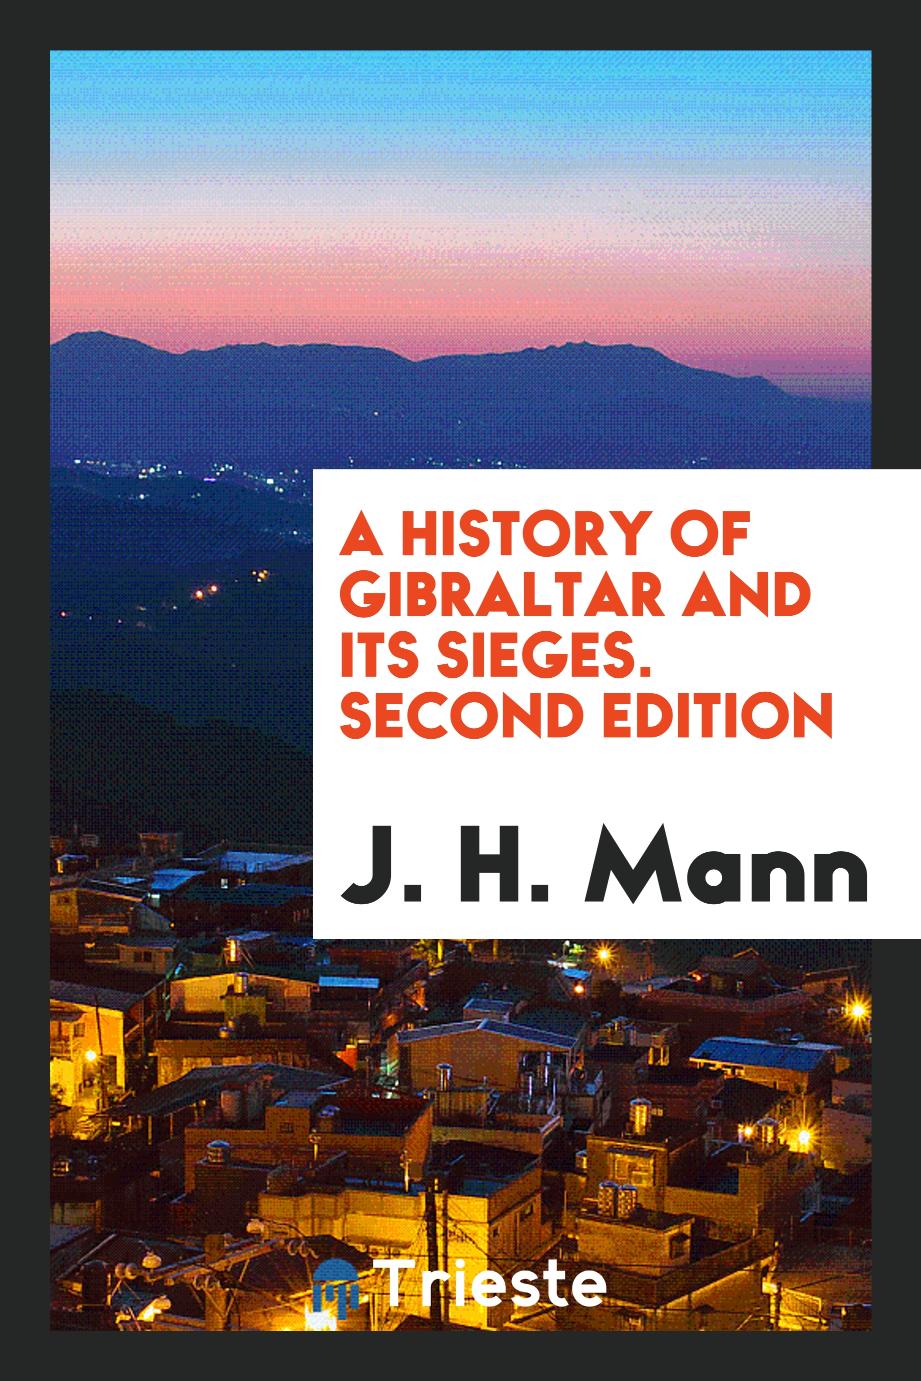 A History of Gibraltar and Its Sieges. Second Edition